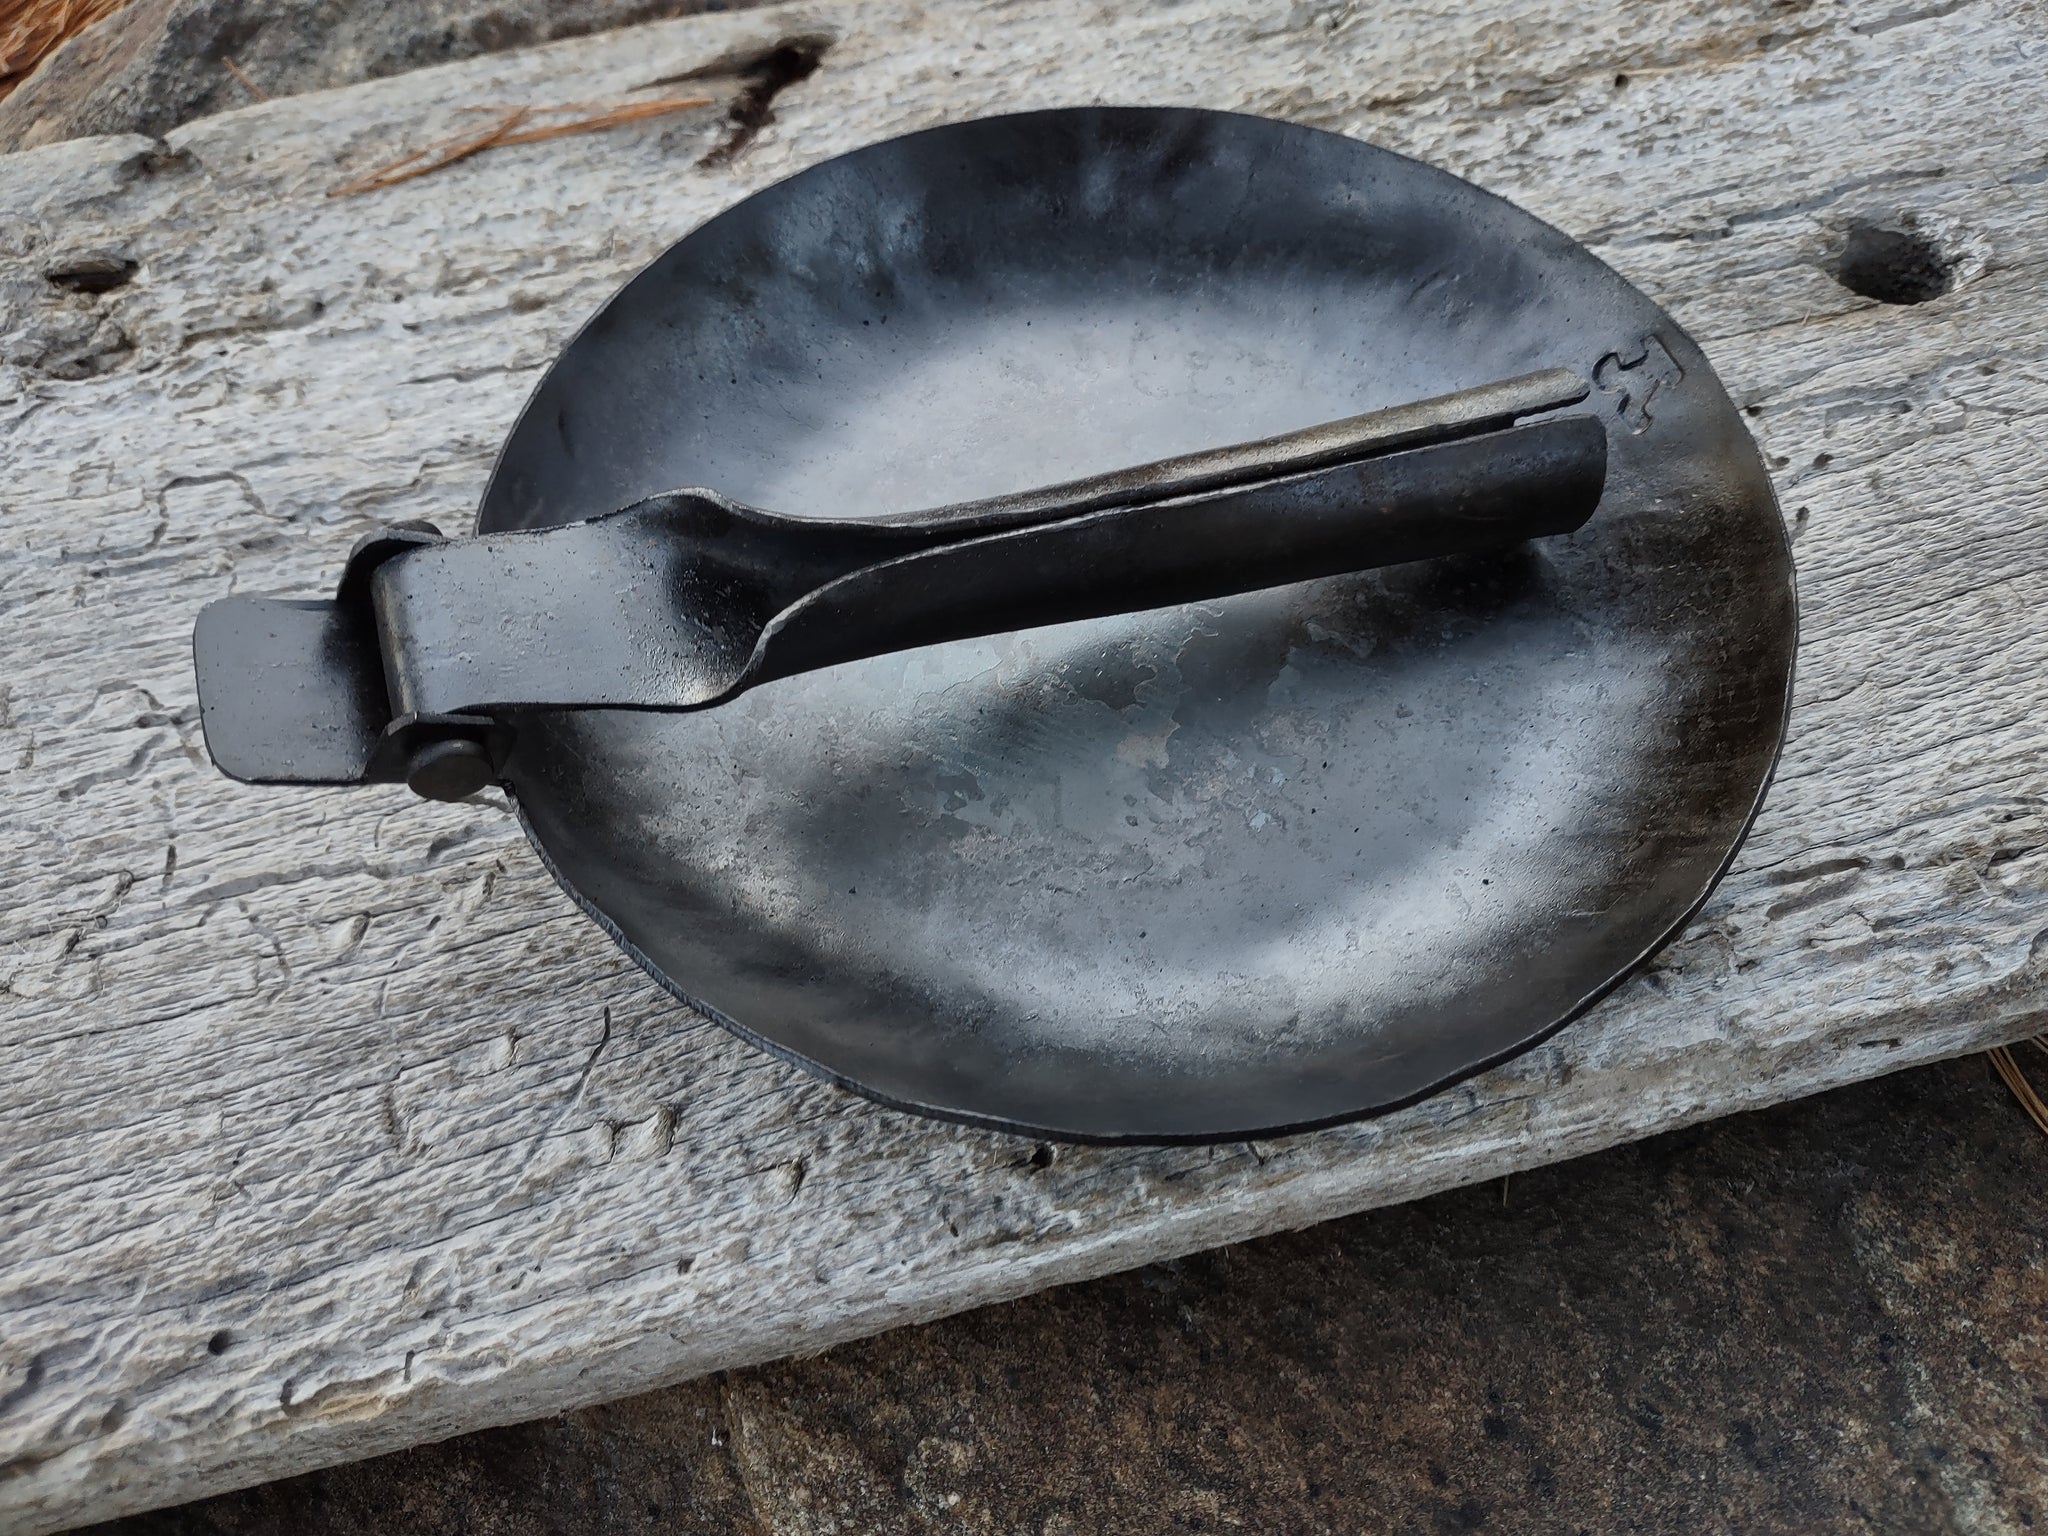 Steel Skillet with Folding Handle - HW-700228 - Medieval Collectibles